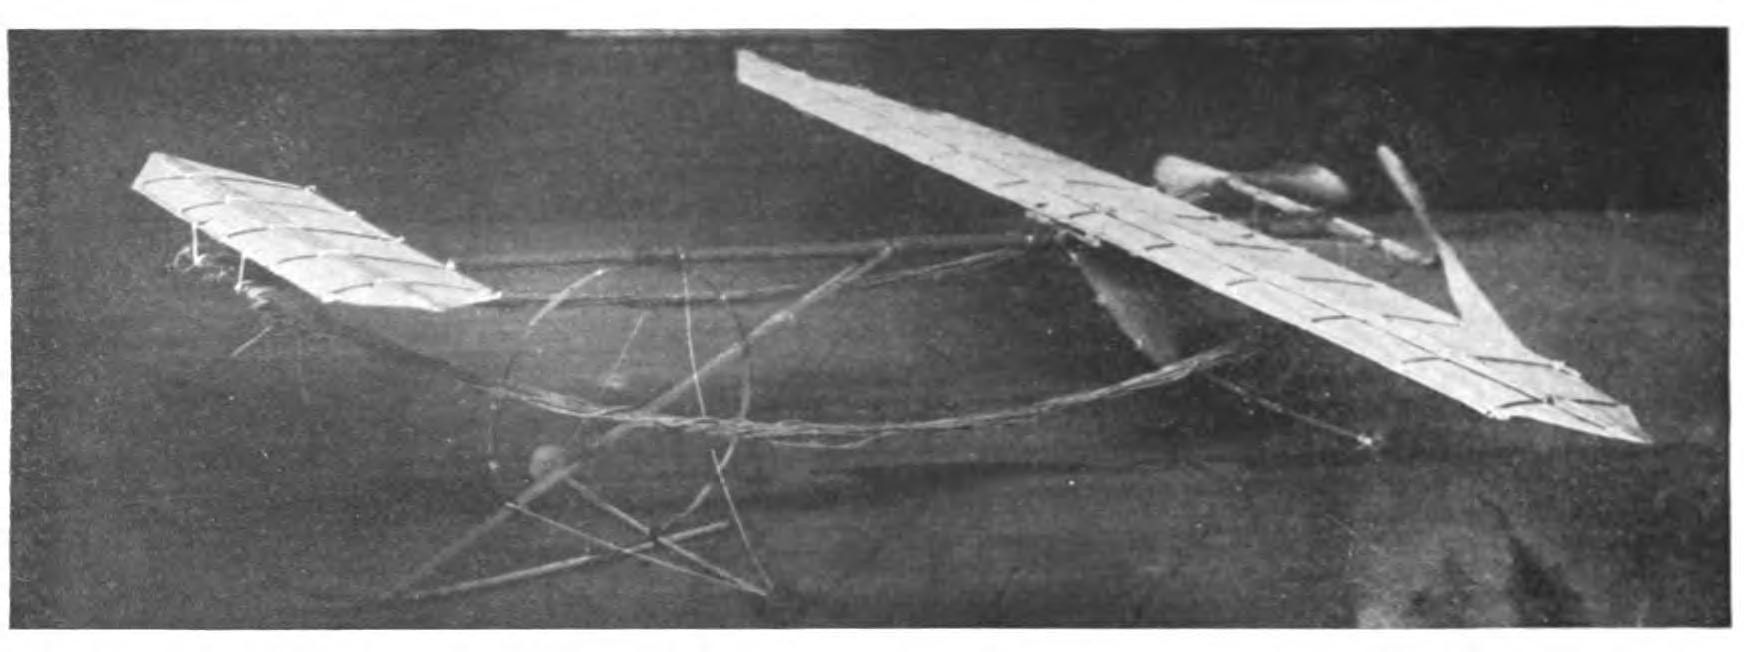 An aeroplane of simple construction that flies remarkably well, built by R. S. Barnaby